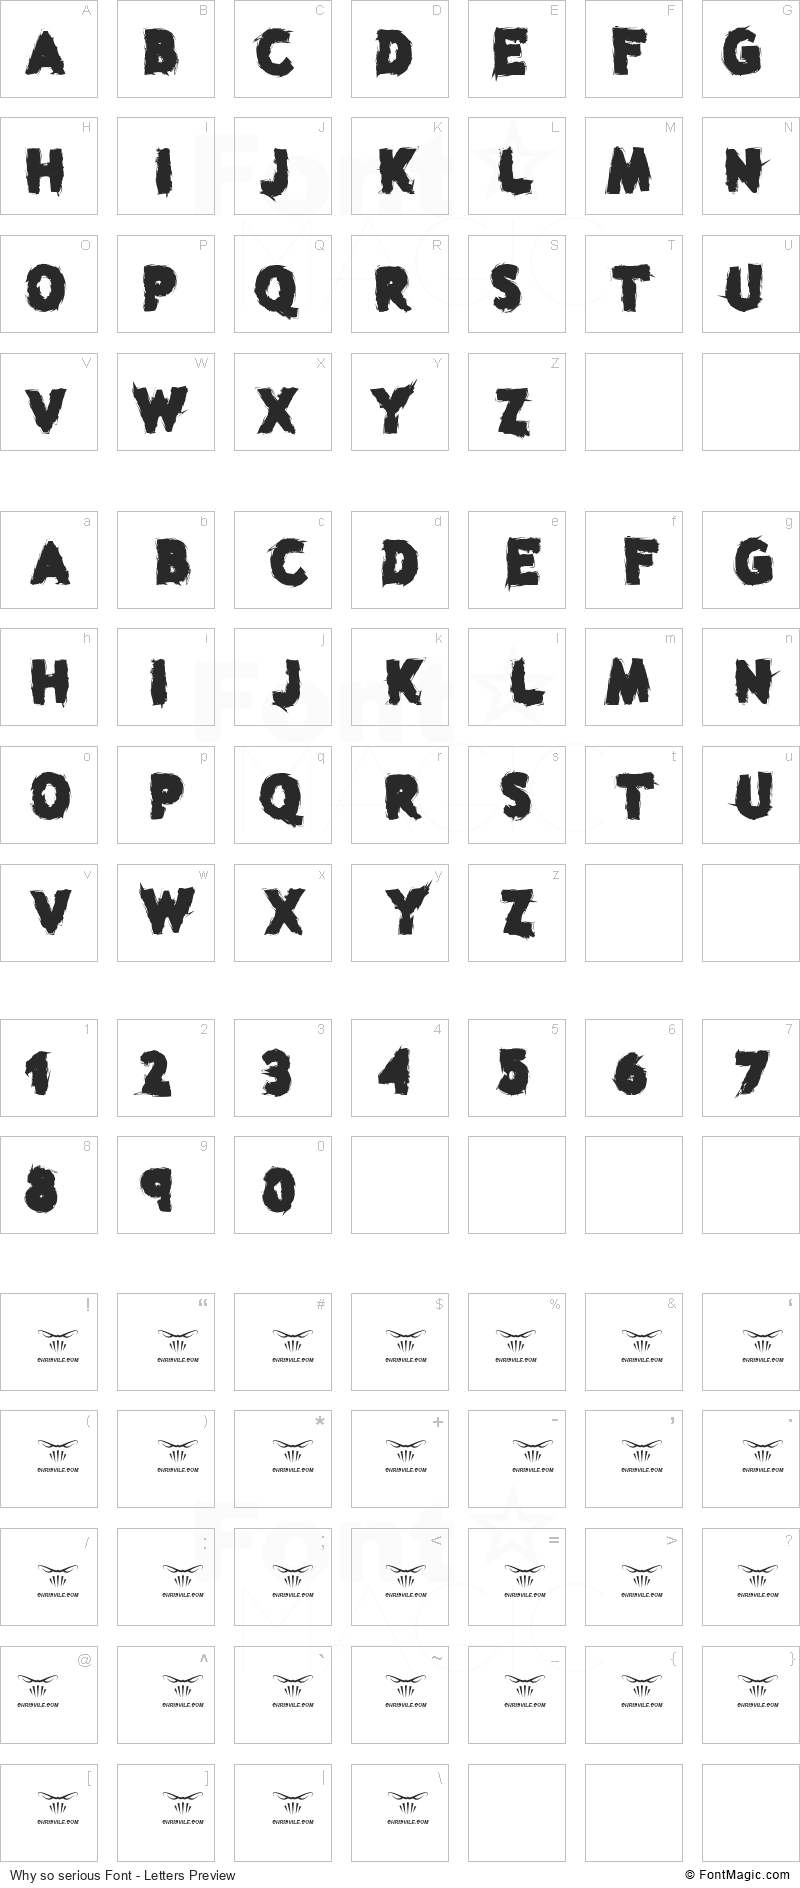 Why so serious Font - All Latters Preview Chart